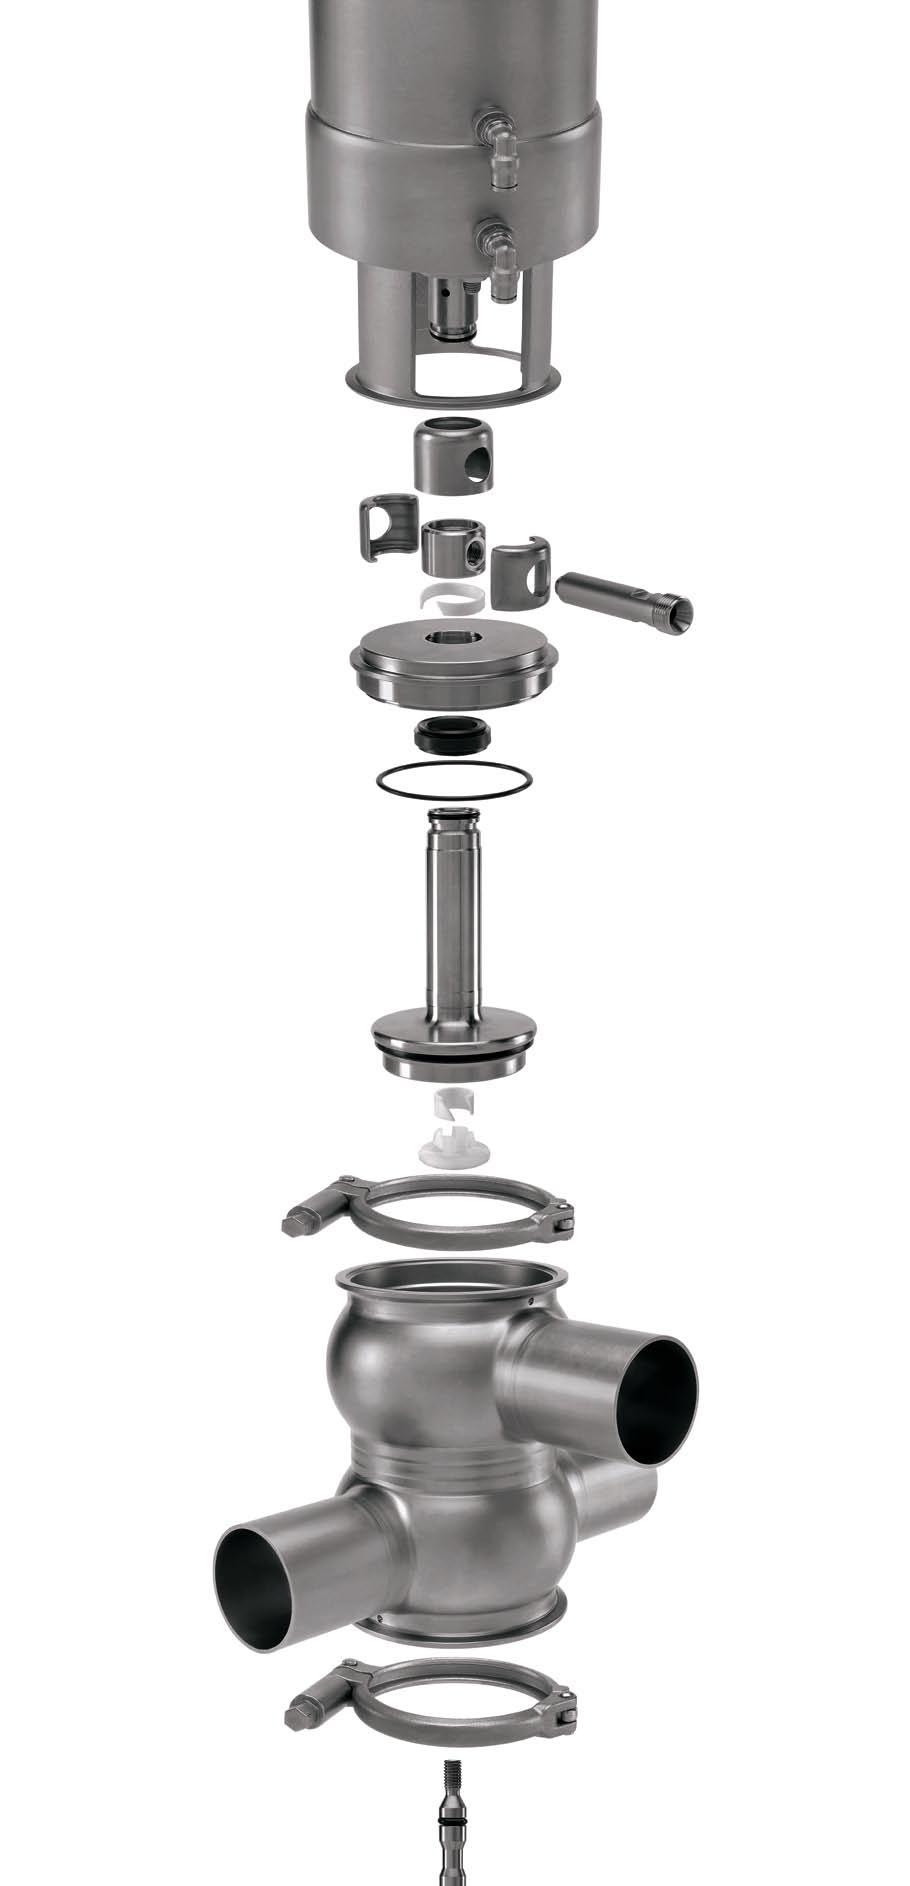 Cut-away views of the plug and seat design in Unique mixproof valves.